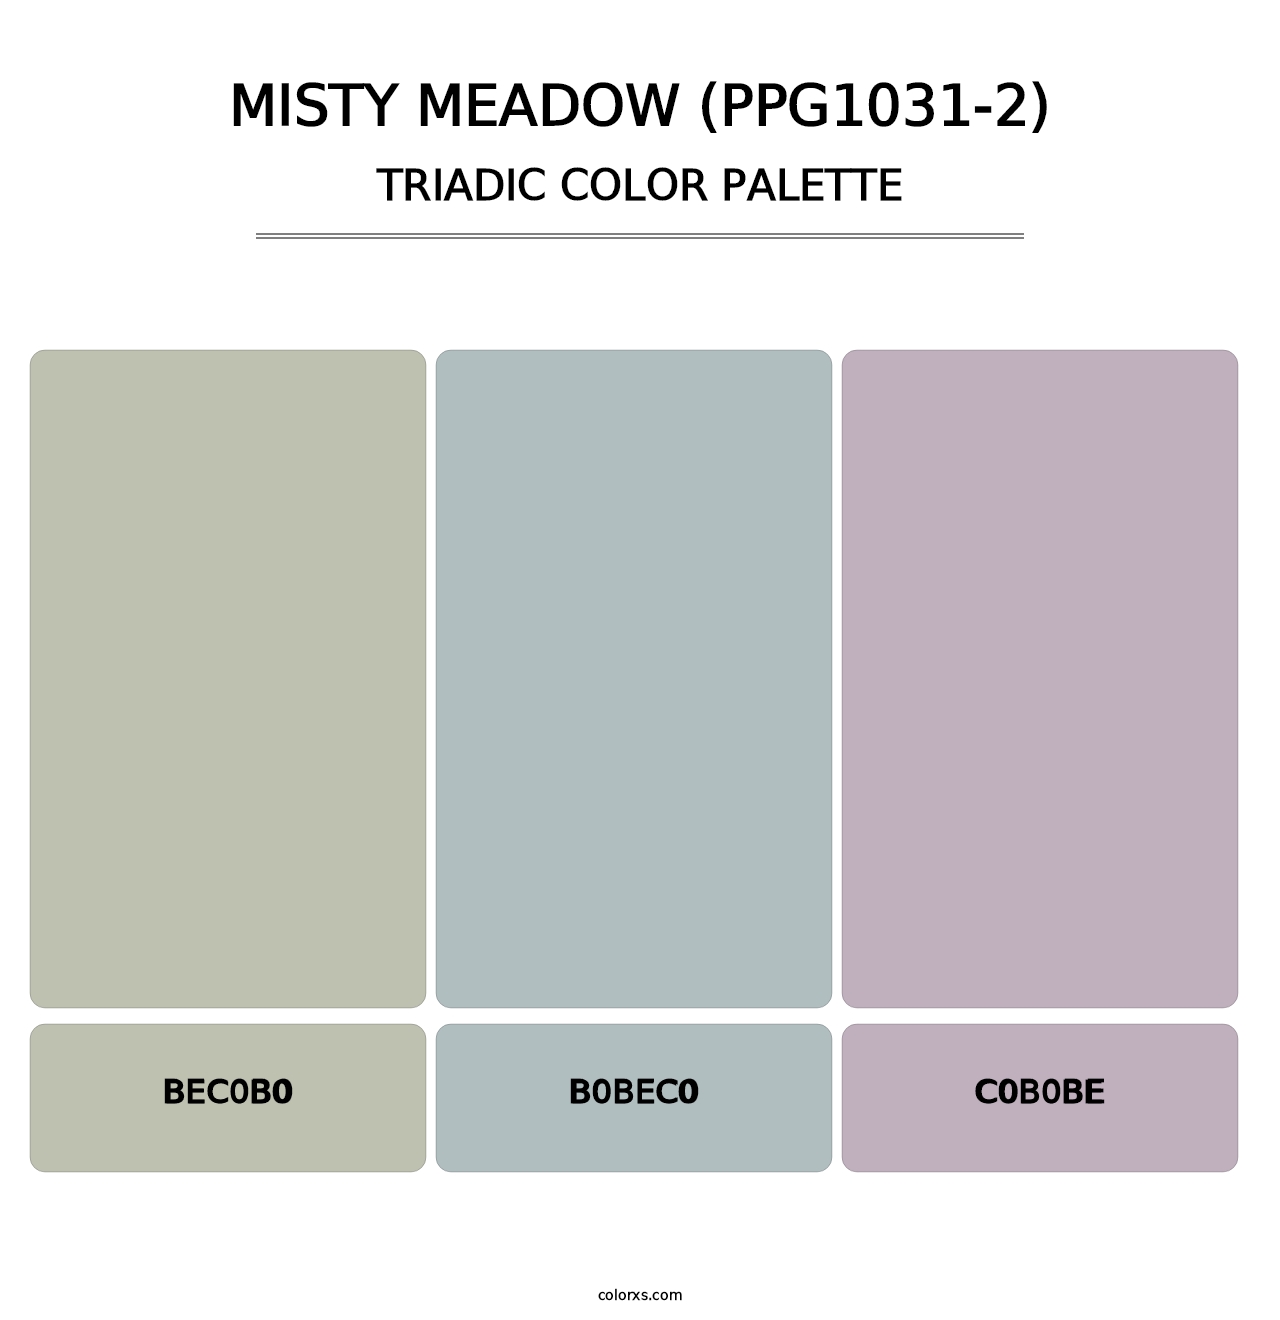 Misty Meadow (PPG1031-2) - Triadic Color Palette